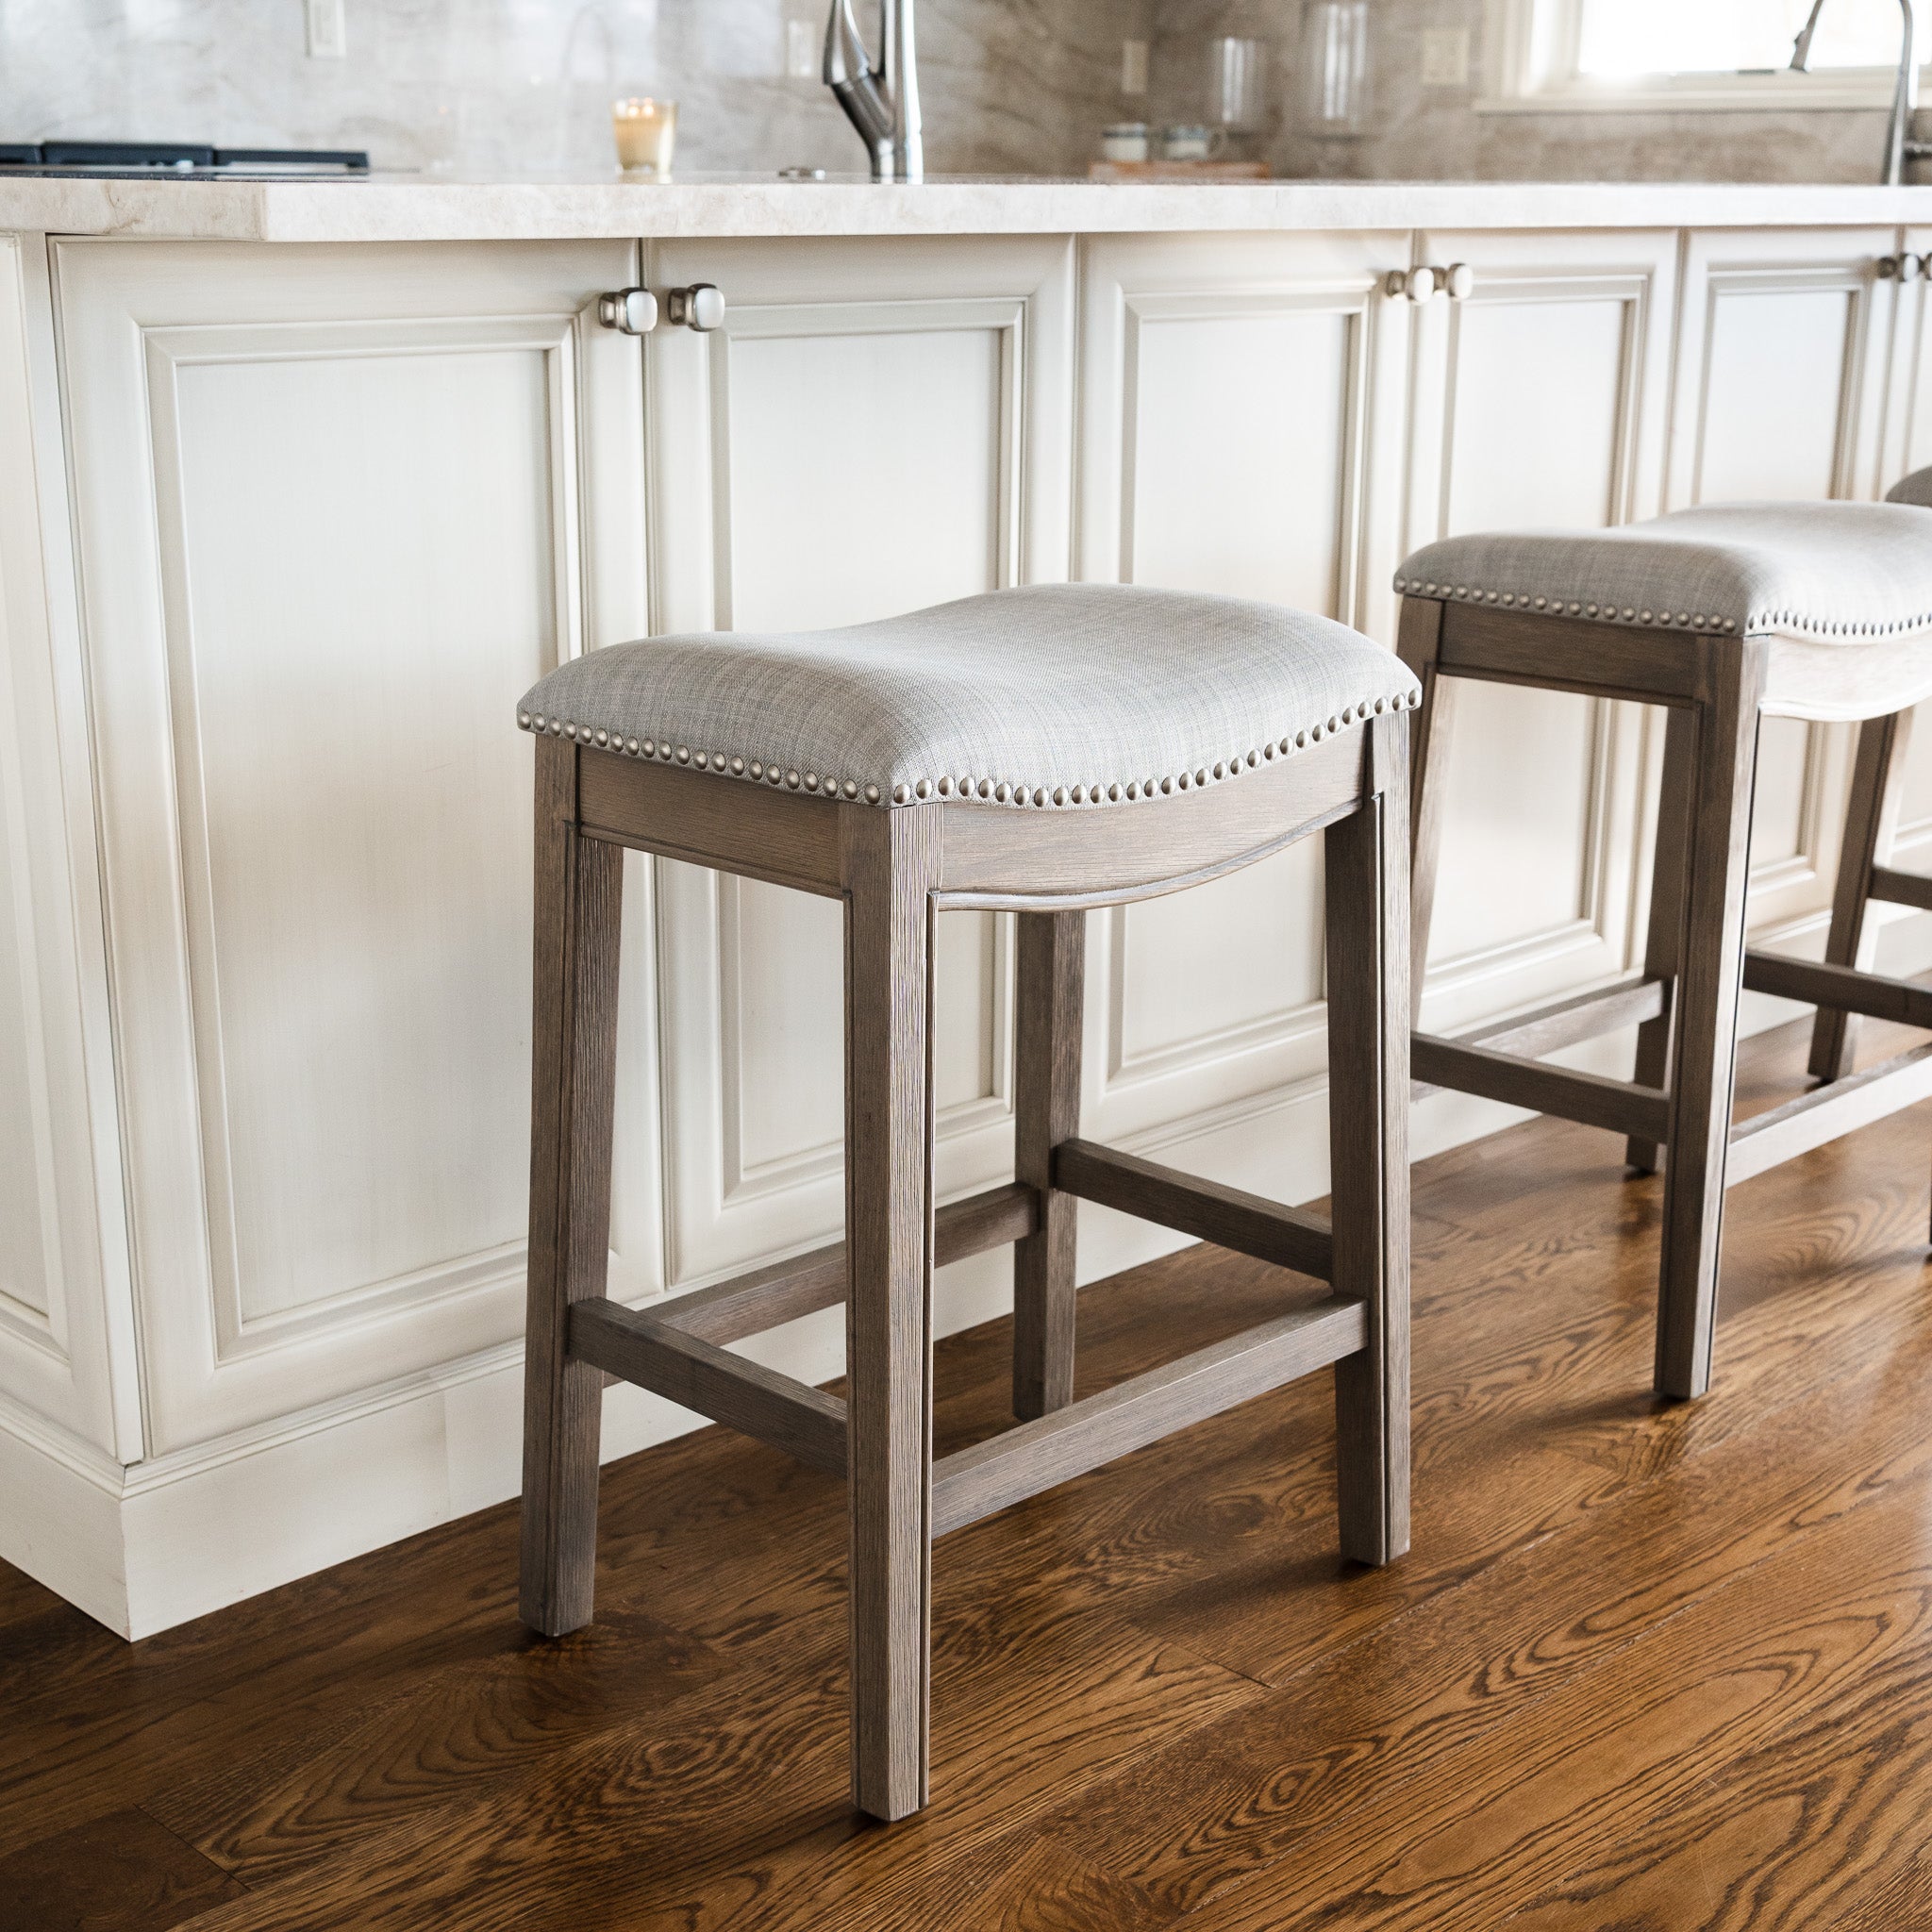 Adrien Saddle Counter Stool in Reclaimed Oak Finish with Ash Grey Fabric Upholstery in Stools by Maven Lane